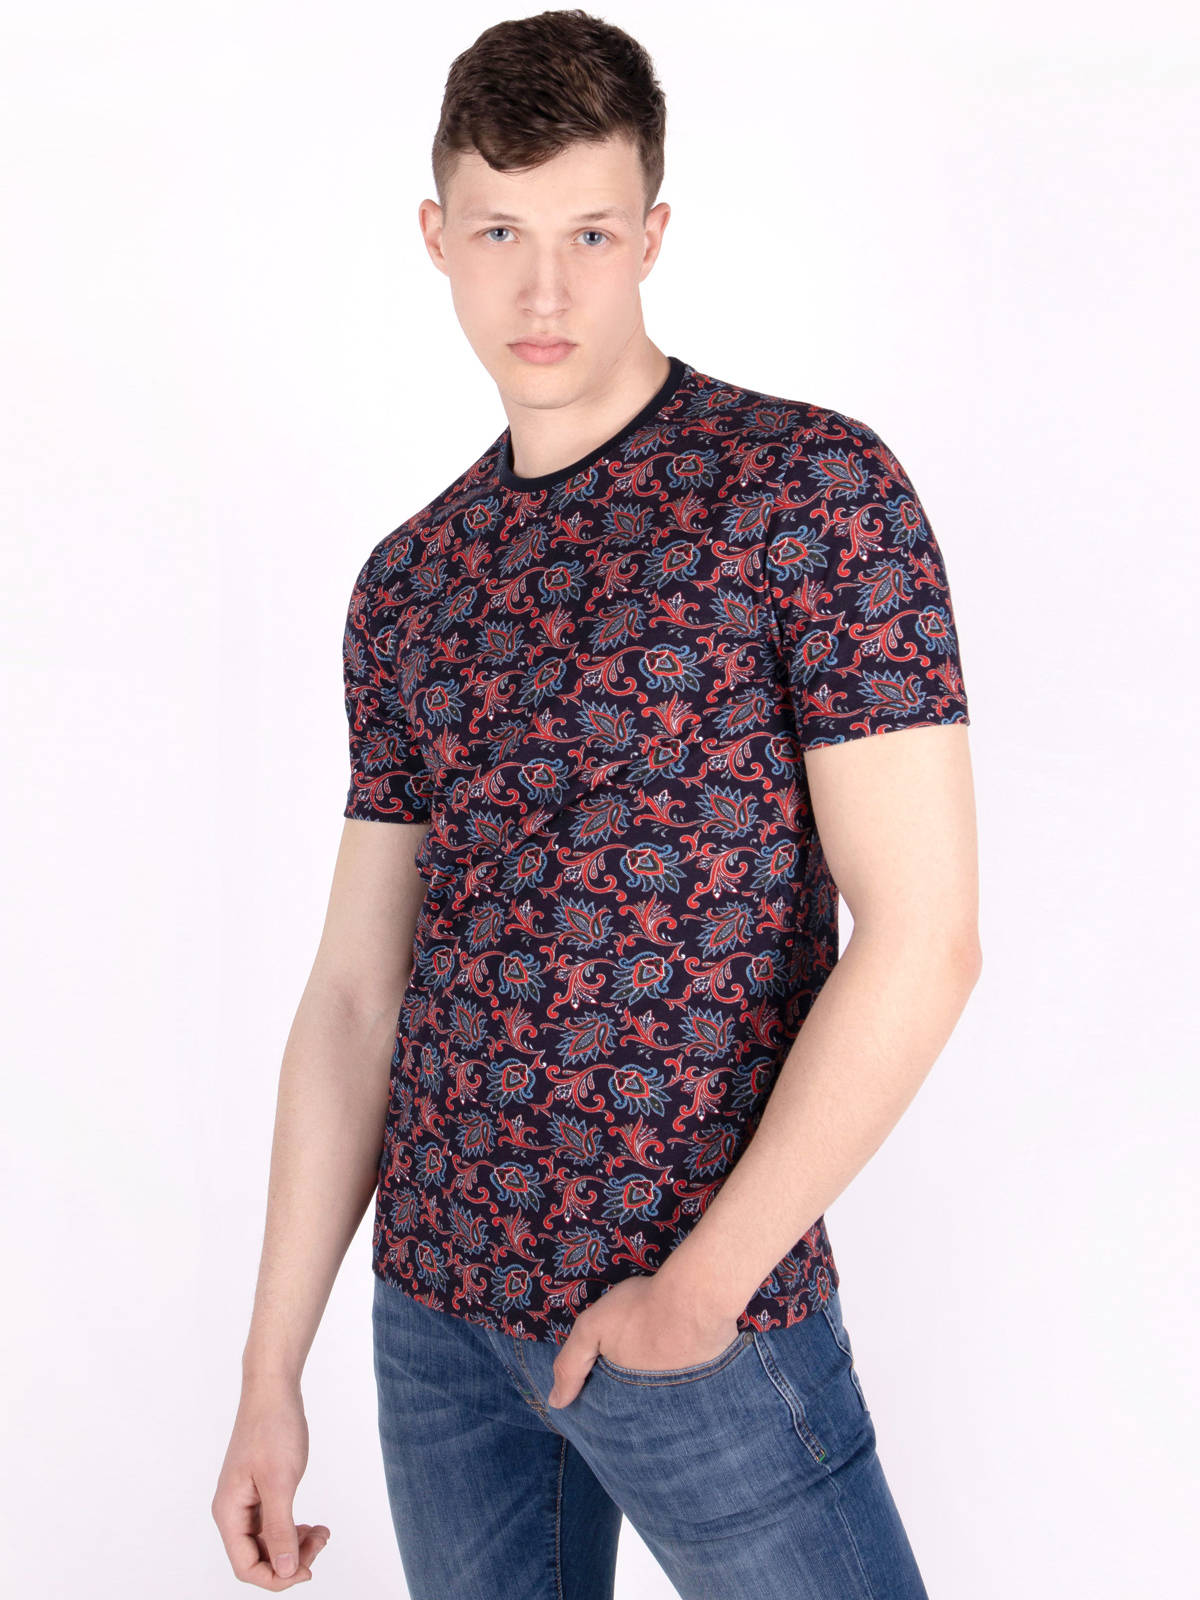 Tshirt in navy blue with floral motifs - 95360 € 16.31 img3